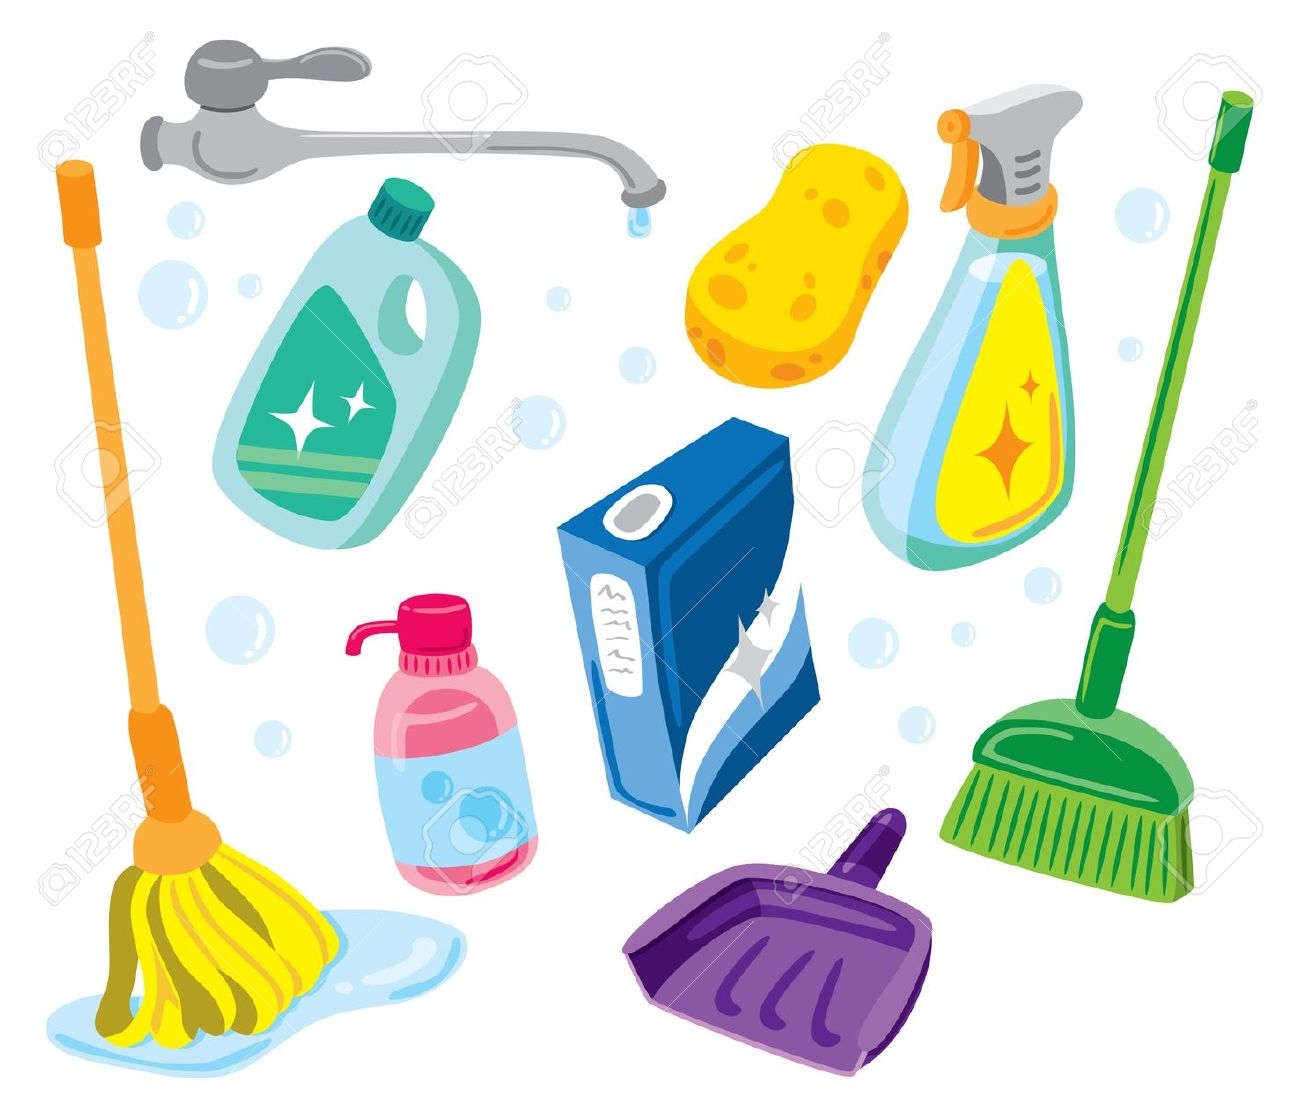 Home Office : The Most Incredible Janitorial Supplies Clipart